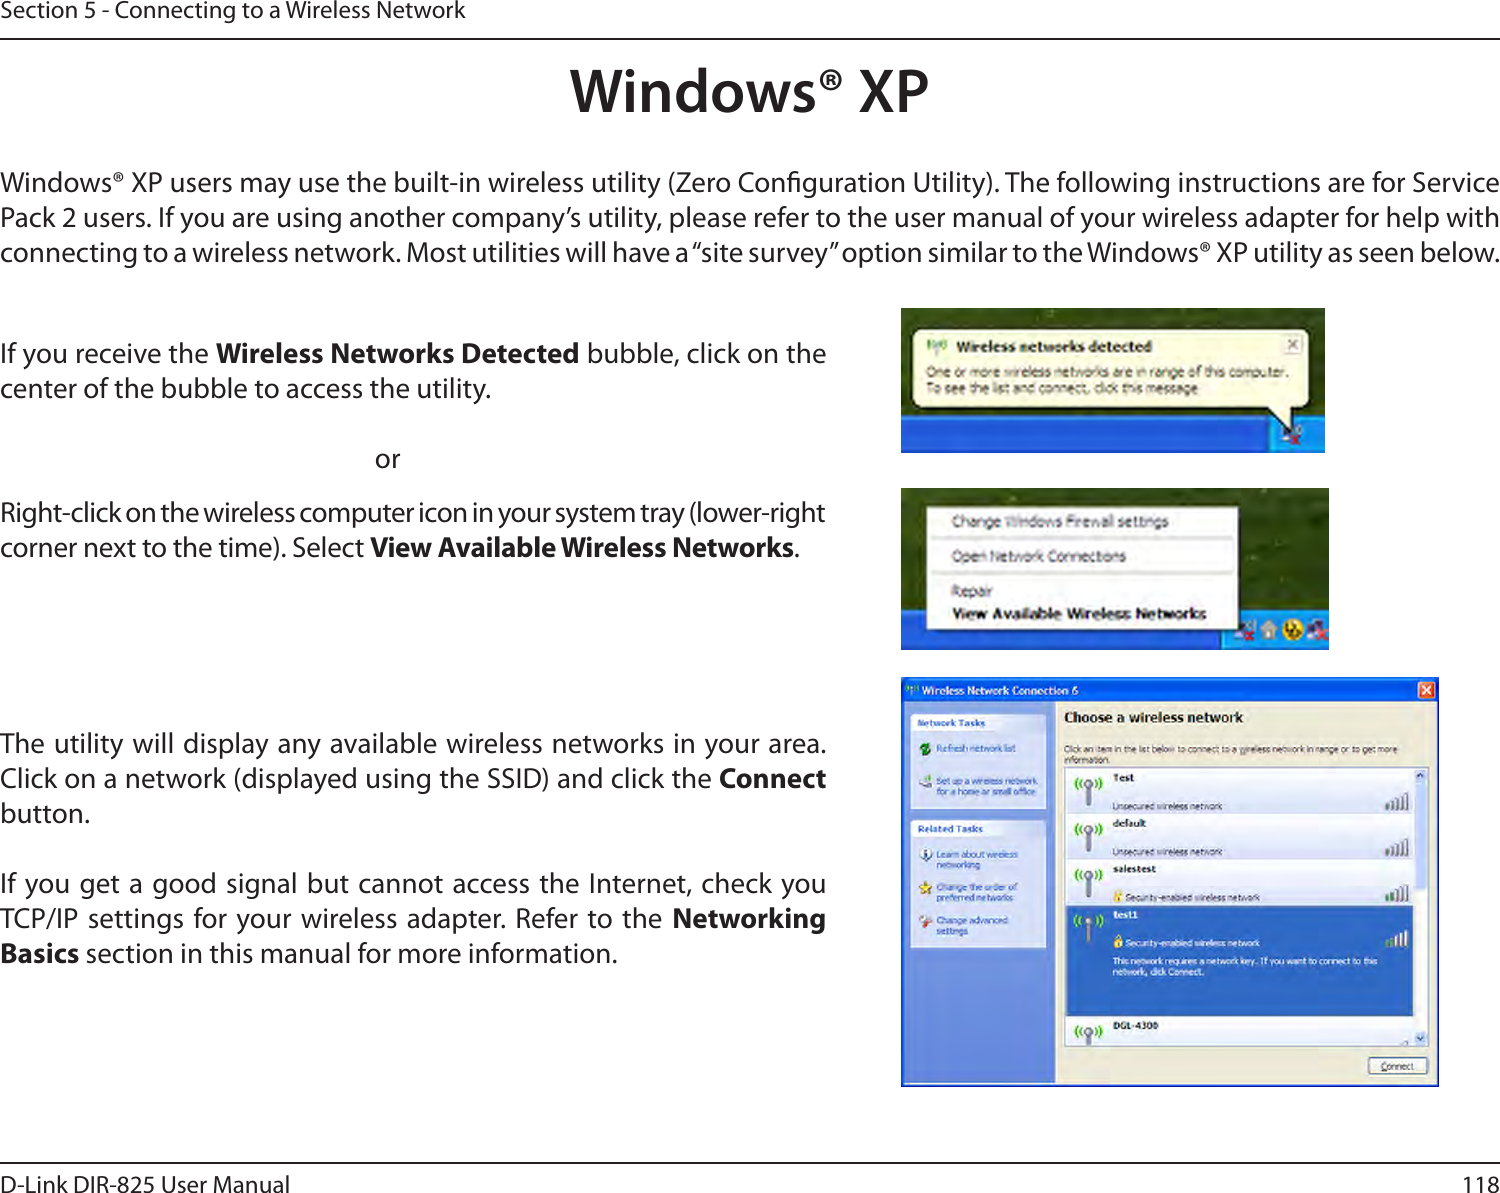 118D-Link DIR-825 User ManualSection 5 - Connecting to a Wireless NetworkWindows® XPWindows® XP users may use the built-in wireless utility (Zero Conguration Utility). The following instructions are for Service Pack 2 users. If you are using another company’s utility, please refer to the user manual of your wireless adapter for help with connecting to a wireless network. Most utilities will have a “site survey” option similar to the Windows® XP utility as seen below.Right-click on the wireless computer icon in your system tray (lower-right corner next to the time). Select View Available Wireless Networks.If you receive the Wireless Networks Detected bubble, click on the center of the bubble to access the utility.     orThe utility will display any available wireless networks in your area. Click on a network (displayed using the SSID) and click the Connect button.If you get a good signal but cannot access the Internet, check you TCP/IP settings for your wireless adapter. Refer to the  Networking Basics section in this manual for more information.